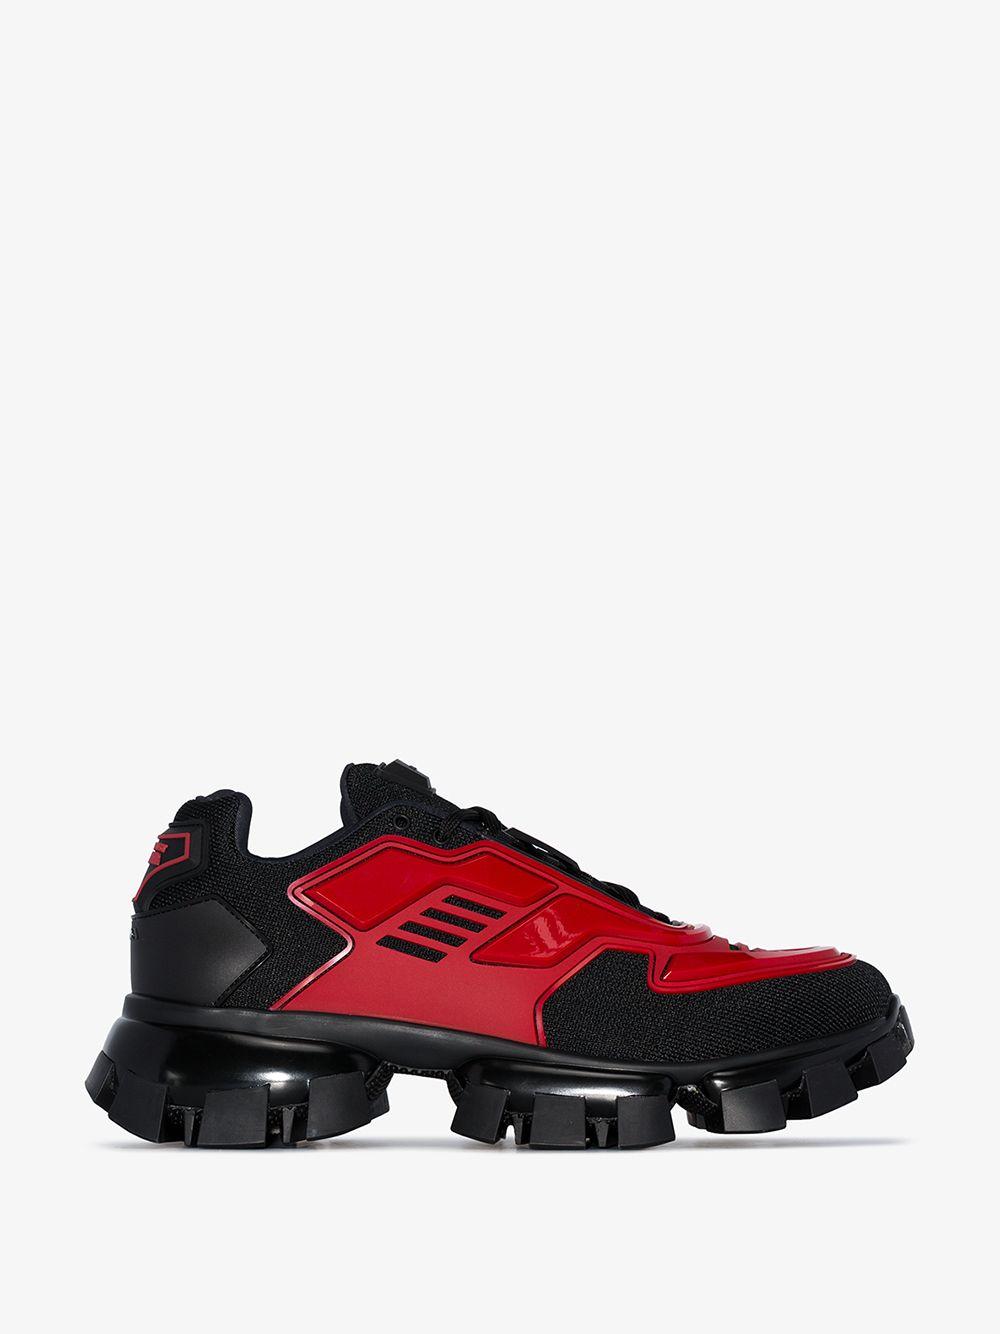 prada black and red shoes